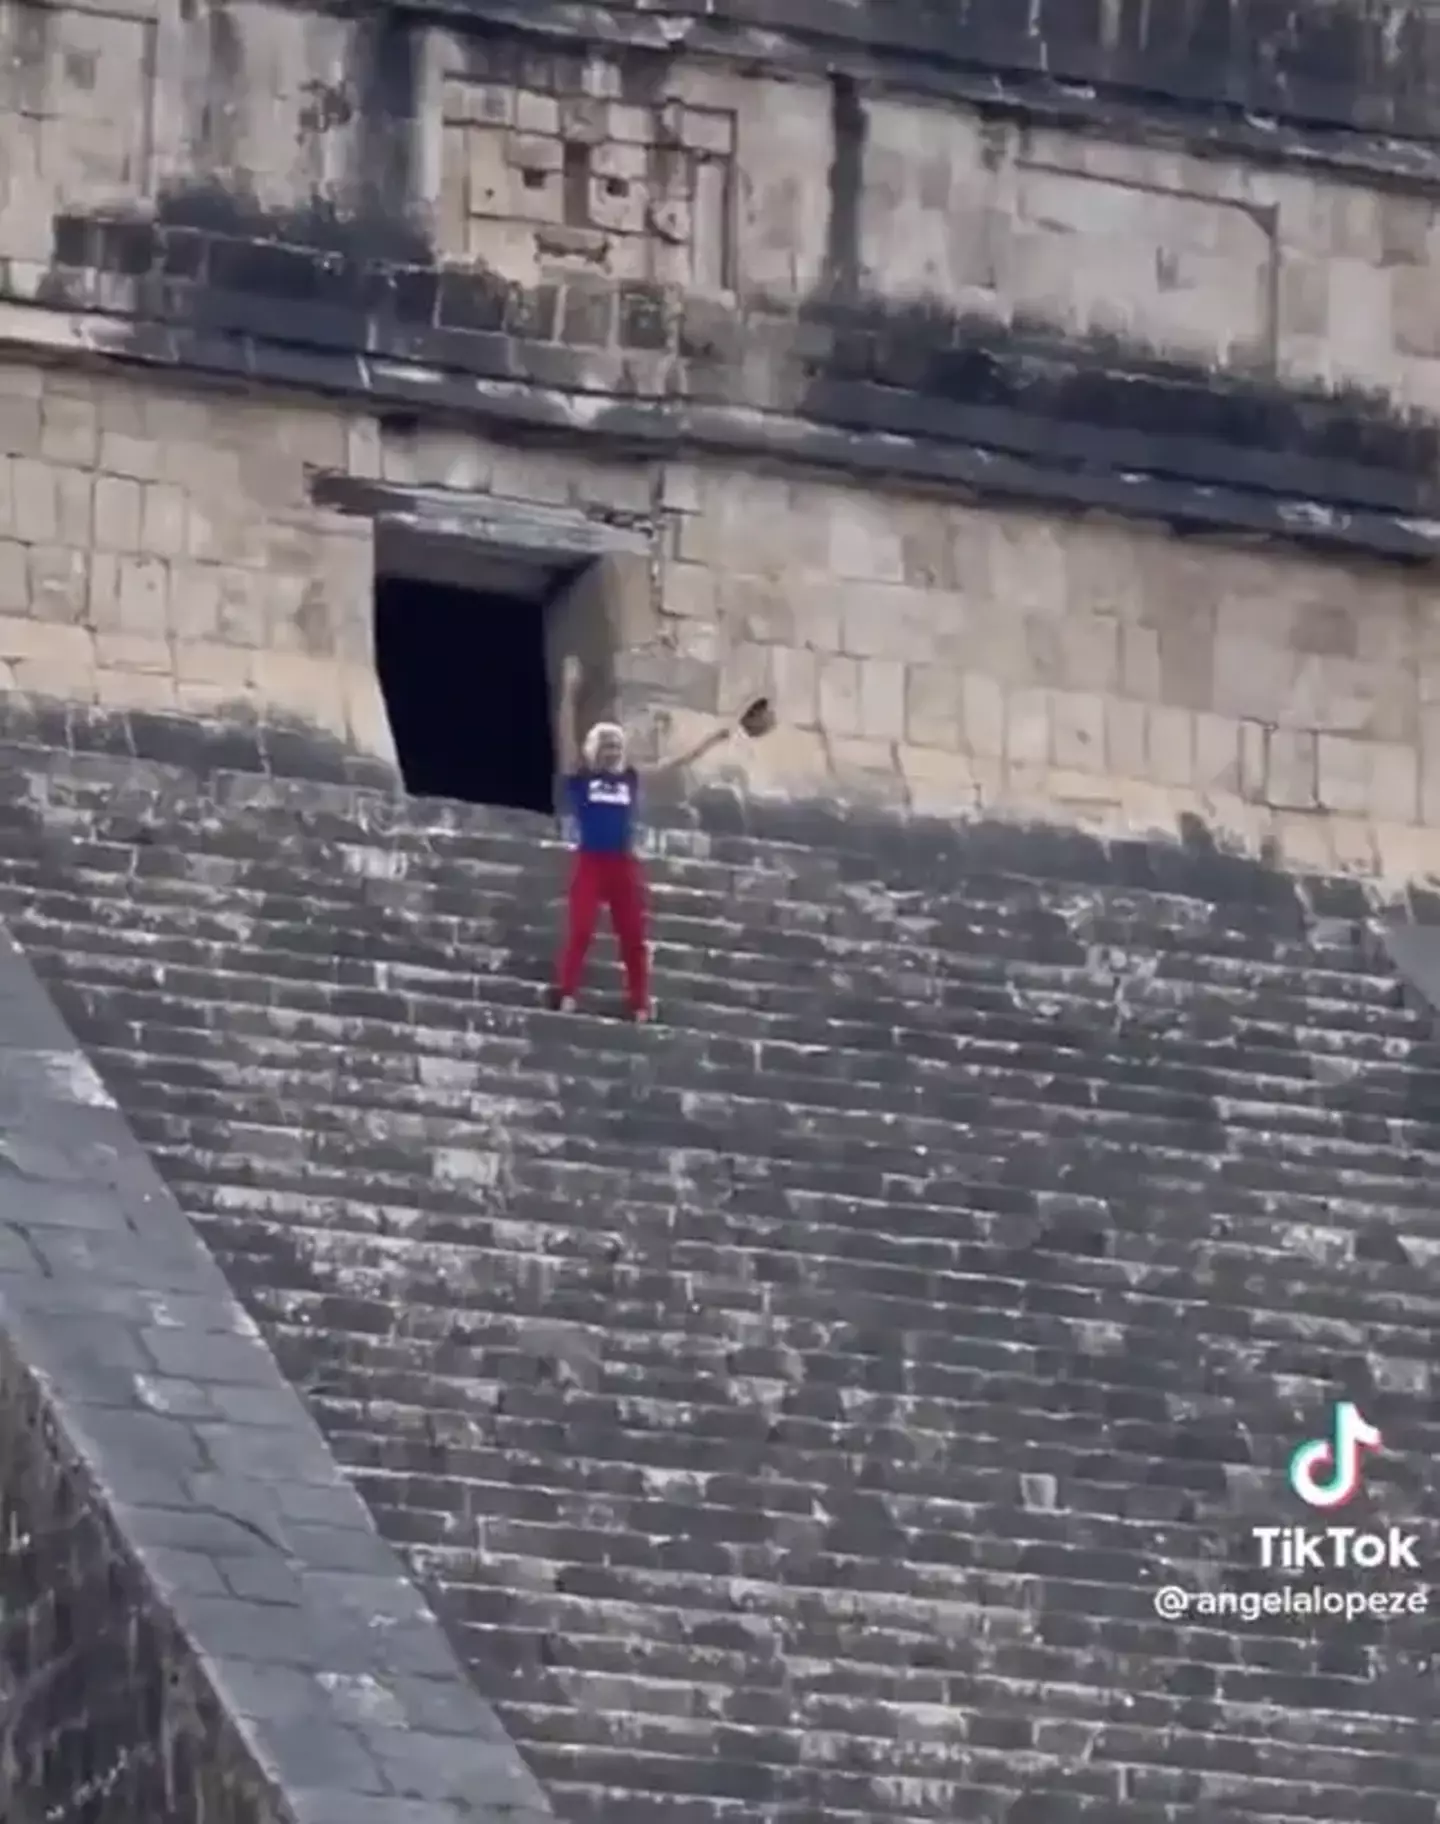 'Lady Chichén Itzá', as she's been nicknamed, has been released and fined for her stunt.